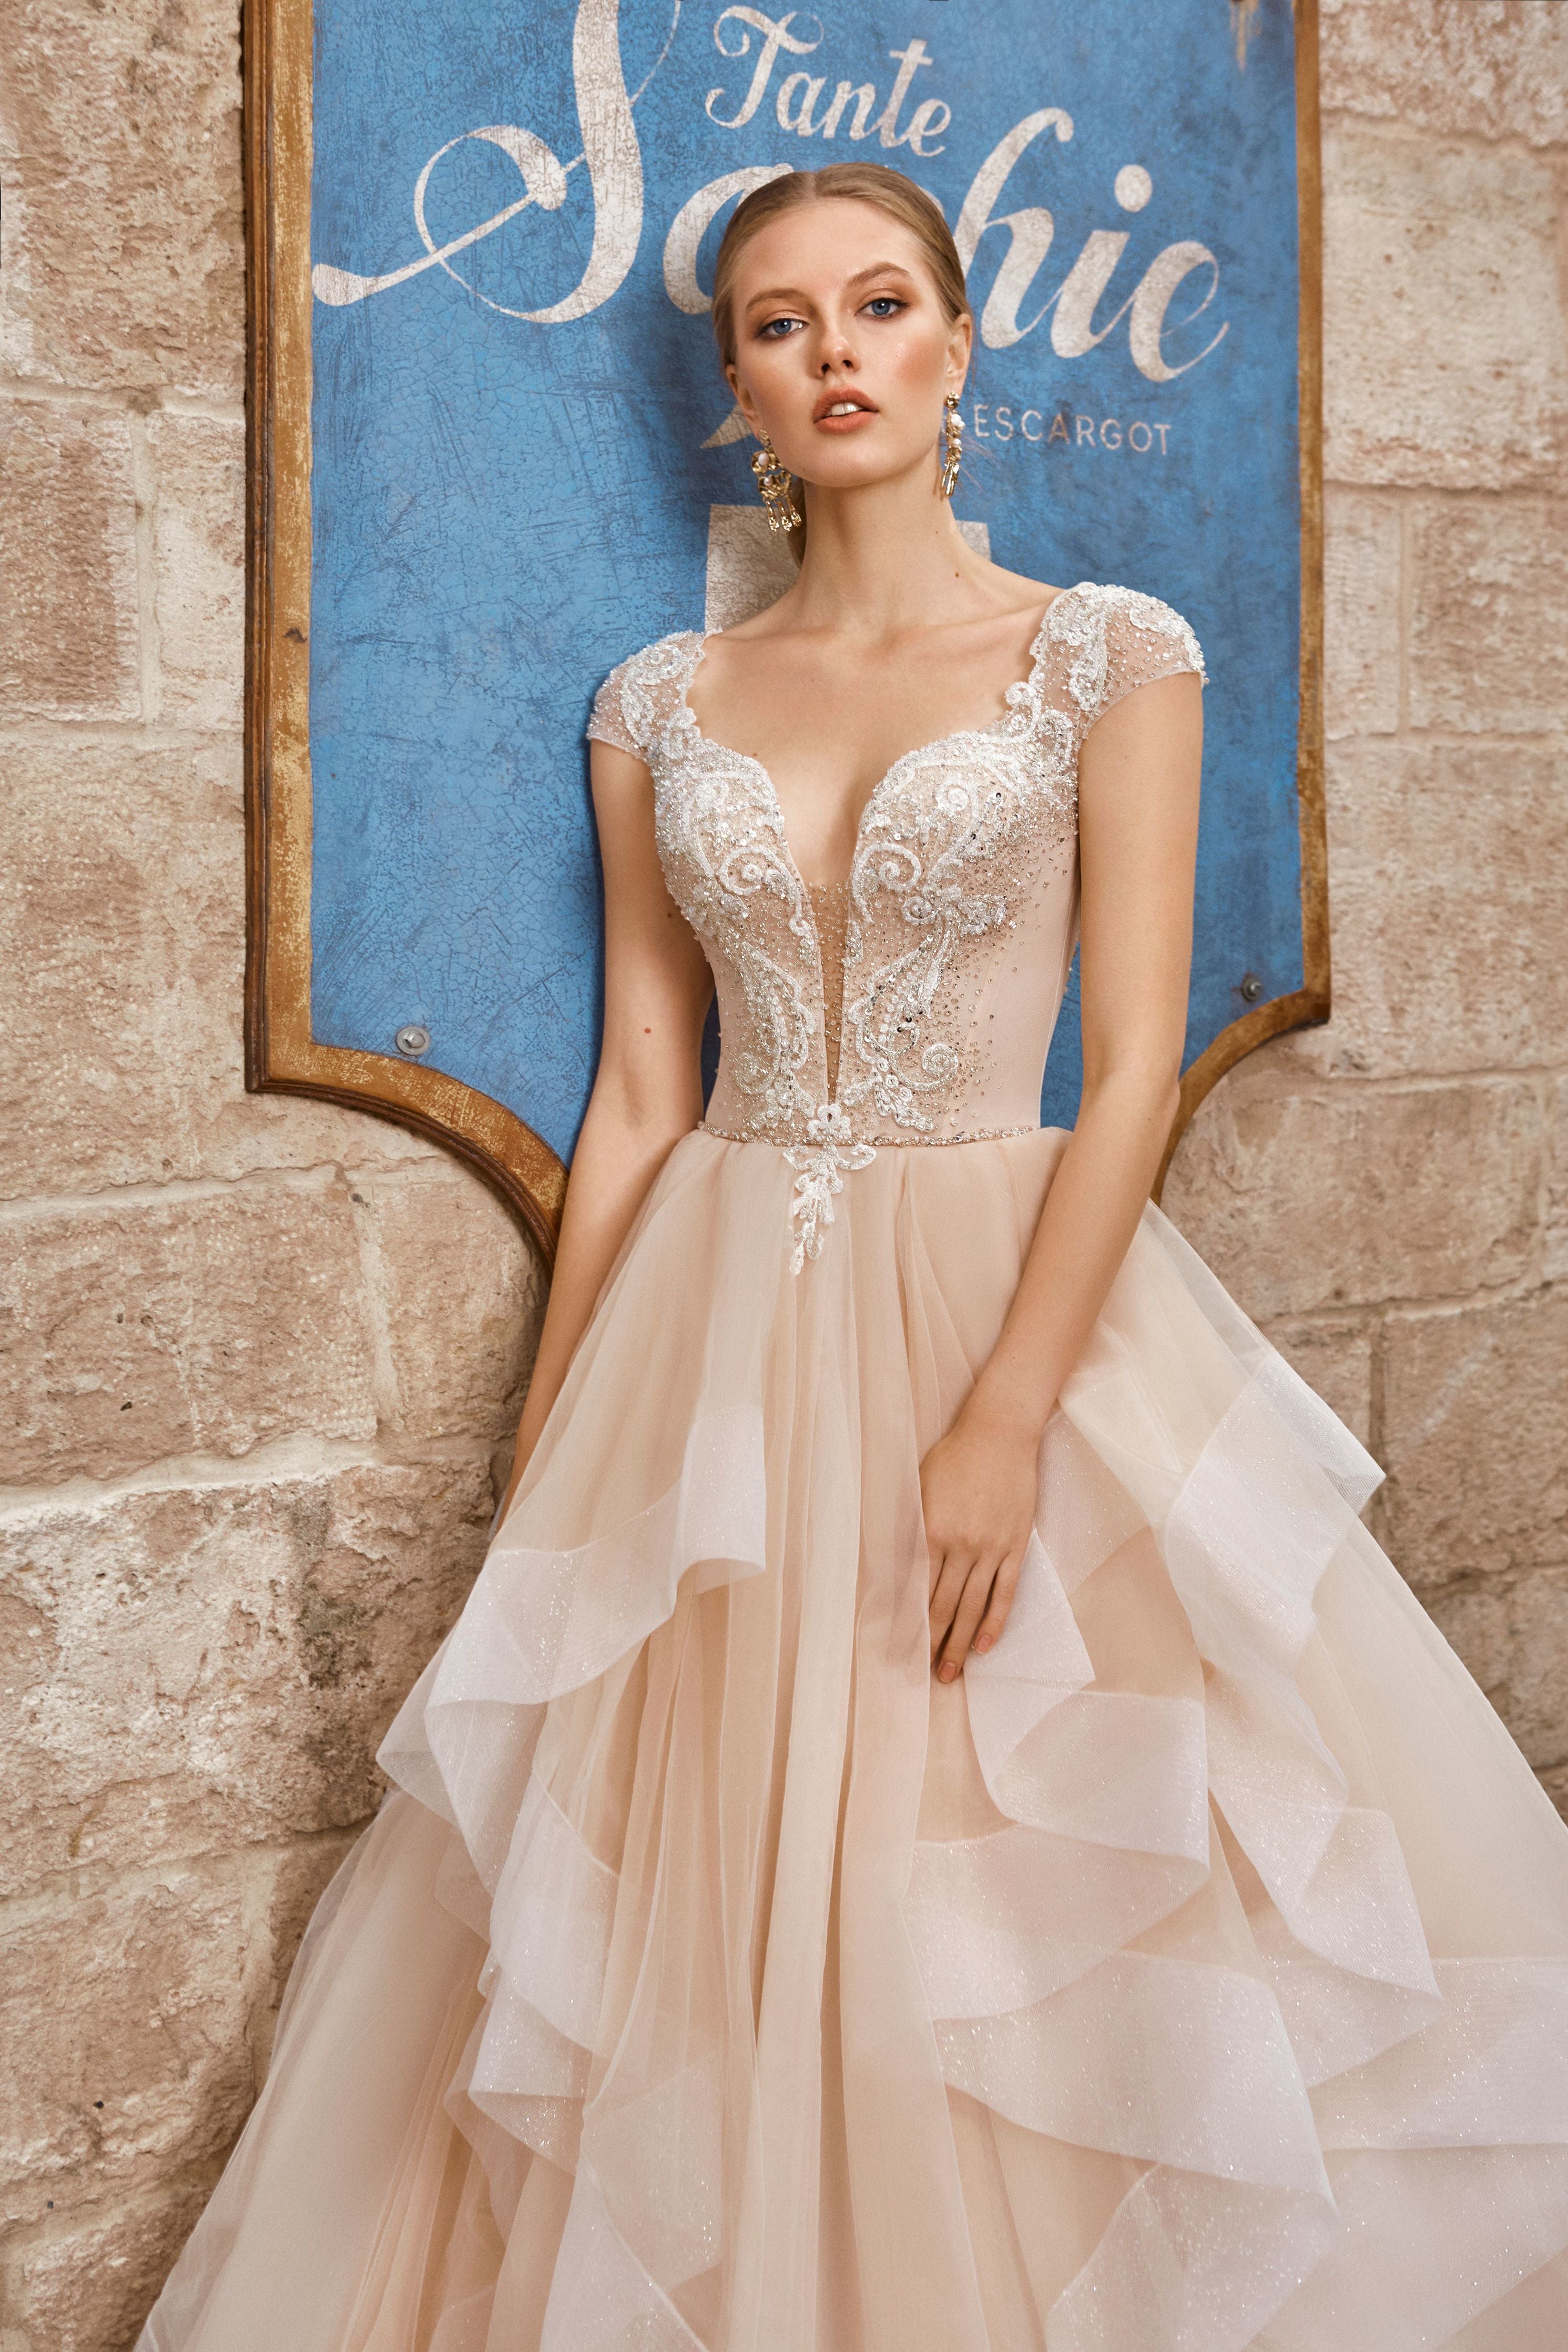 Sophie - Ruffled Skirt Ball Gown with Sweetheart Neckline - Maxima Bridal